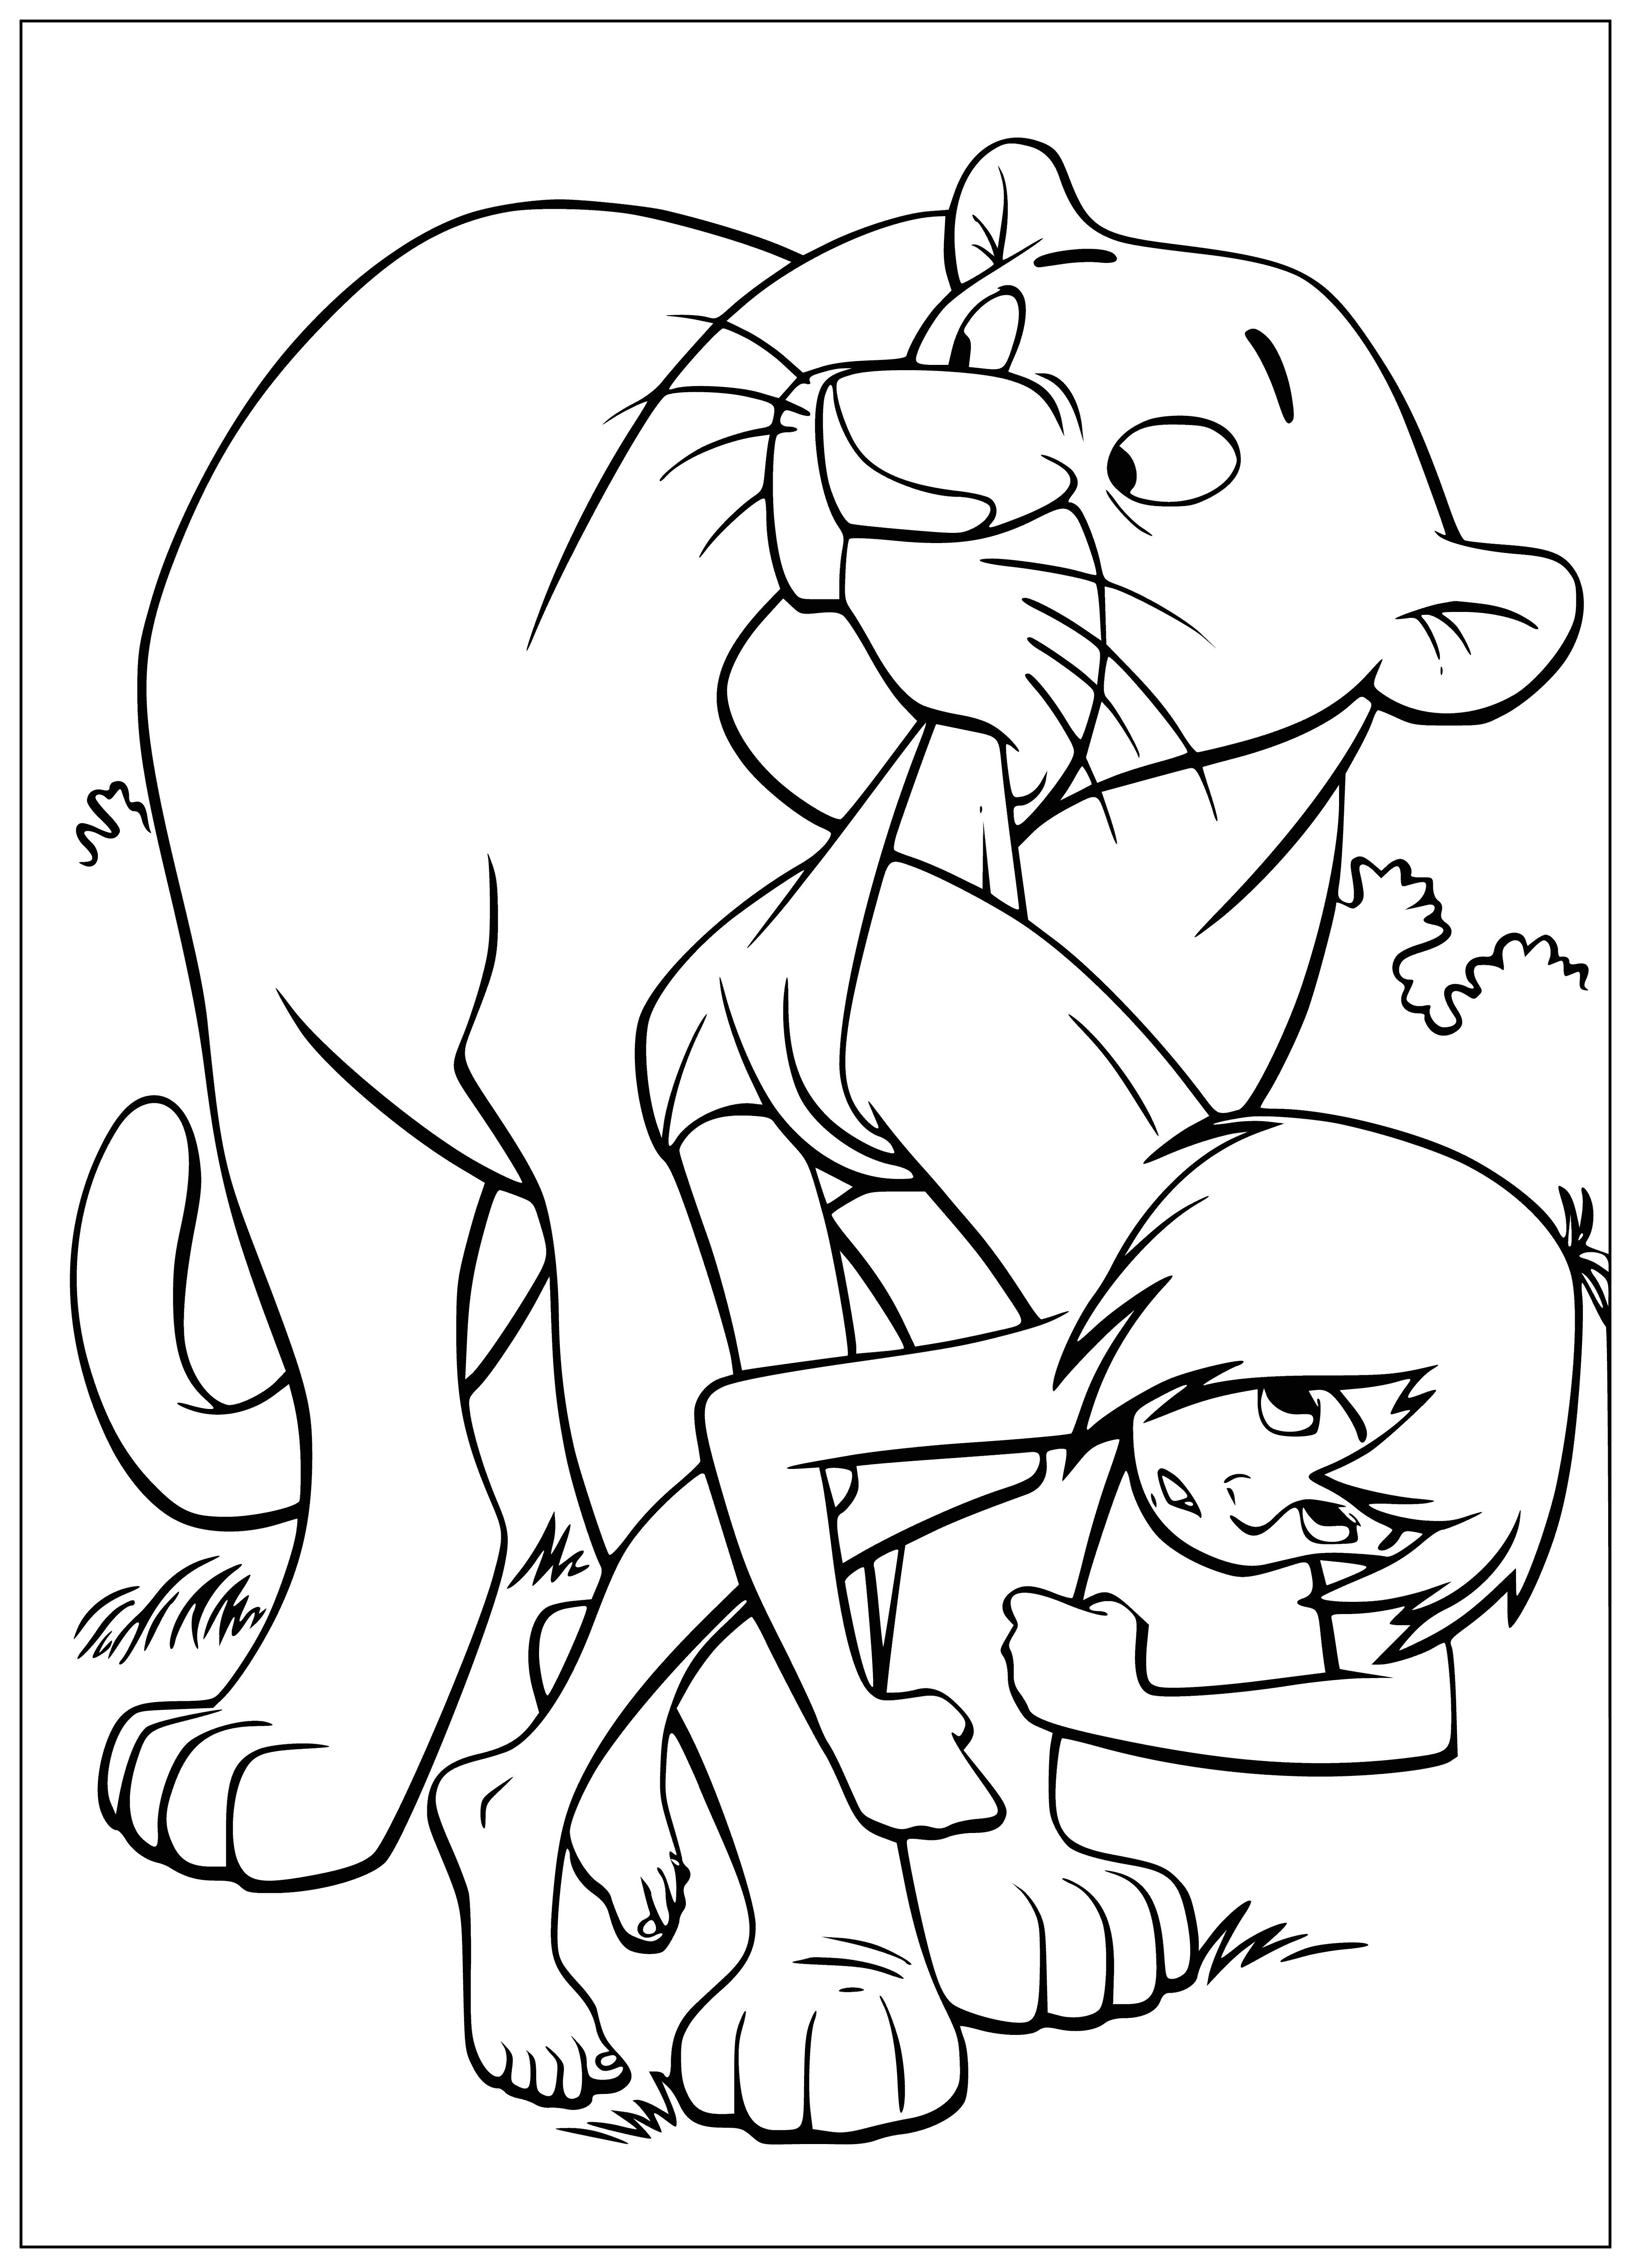 coloring page: Bagira, a black panther, and Mowgli, a young boy, stand in the jungle looking at each other, seemingly having a conversation.